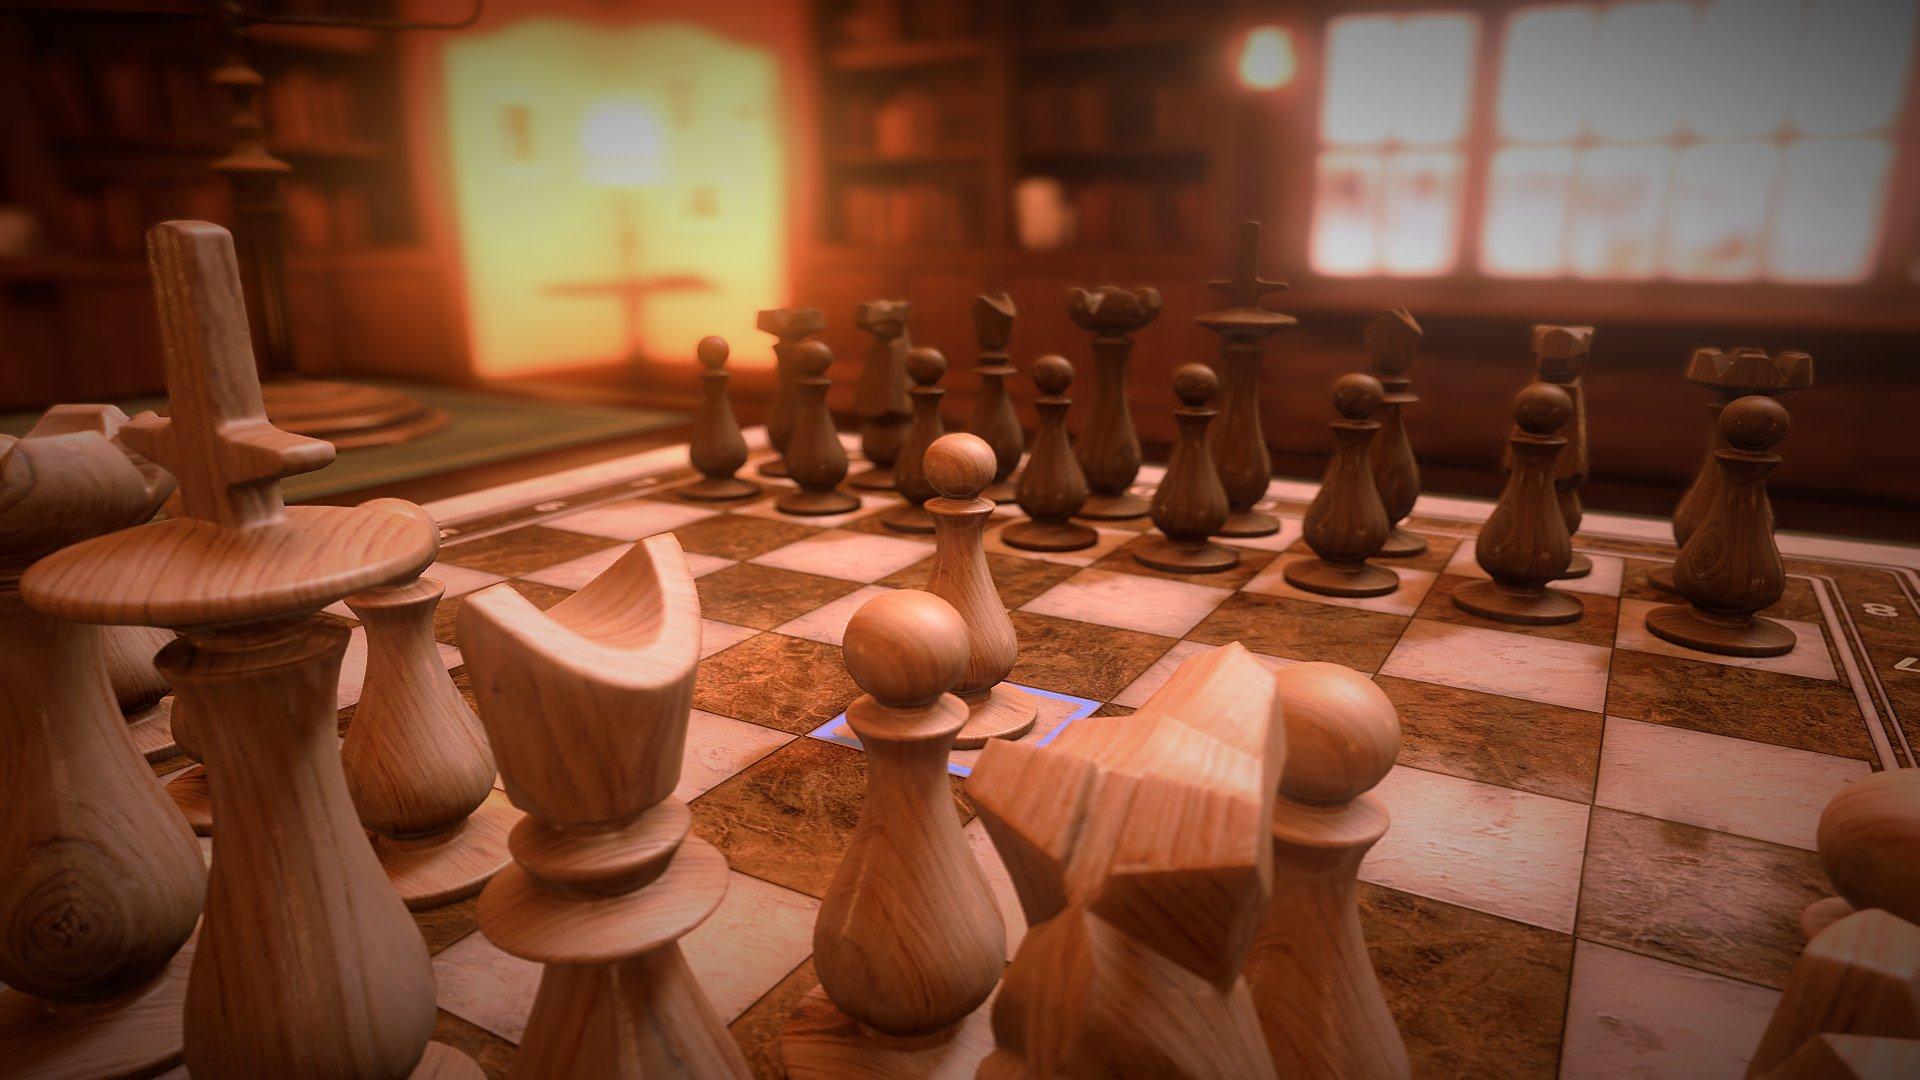 Pure Chess - PlayStation 4